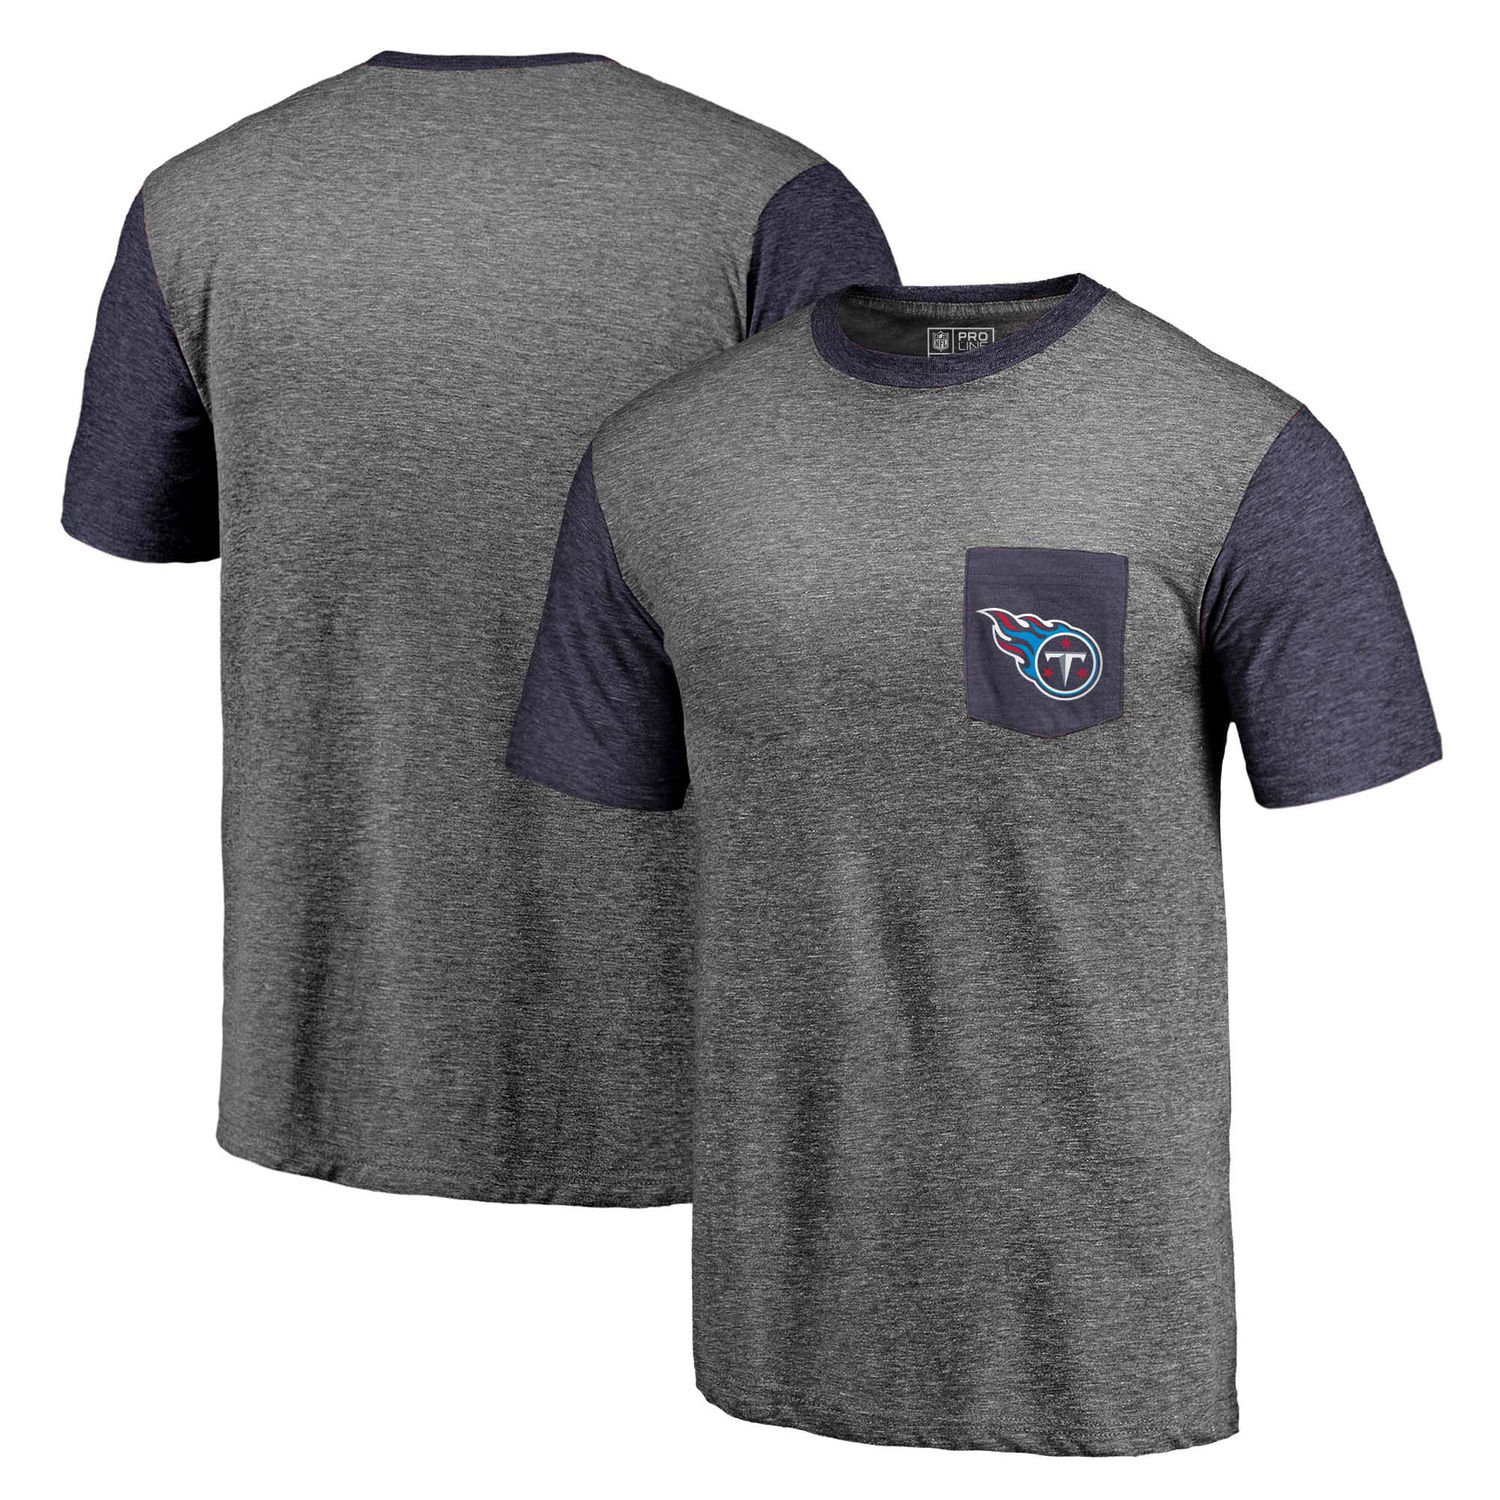 Men's Tennessee Titans Pro Line by Fanatics Branded Heathered Gray-Navy Refresh Pocket T-Shirt